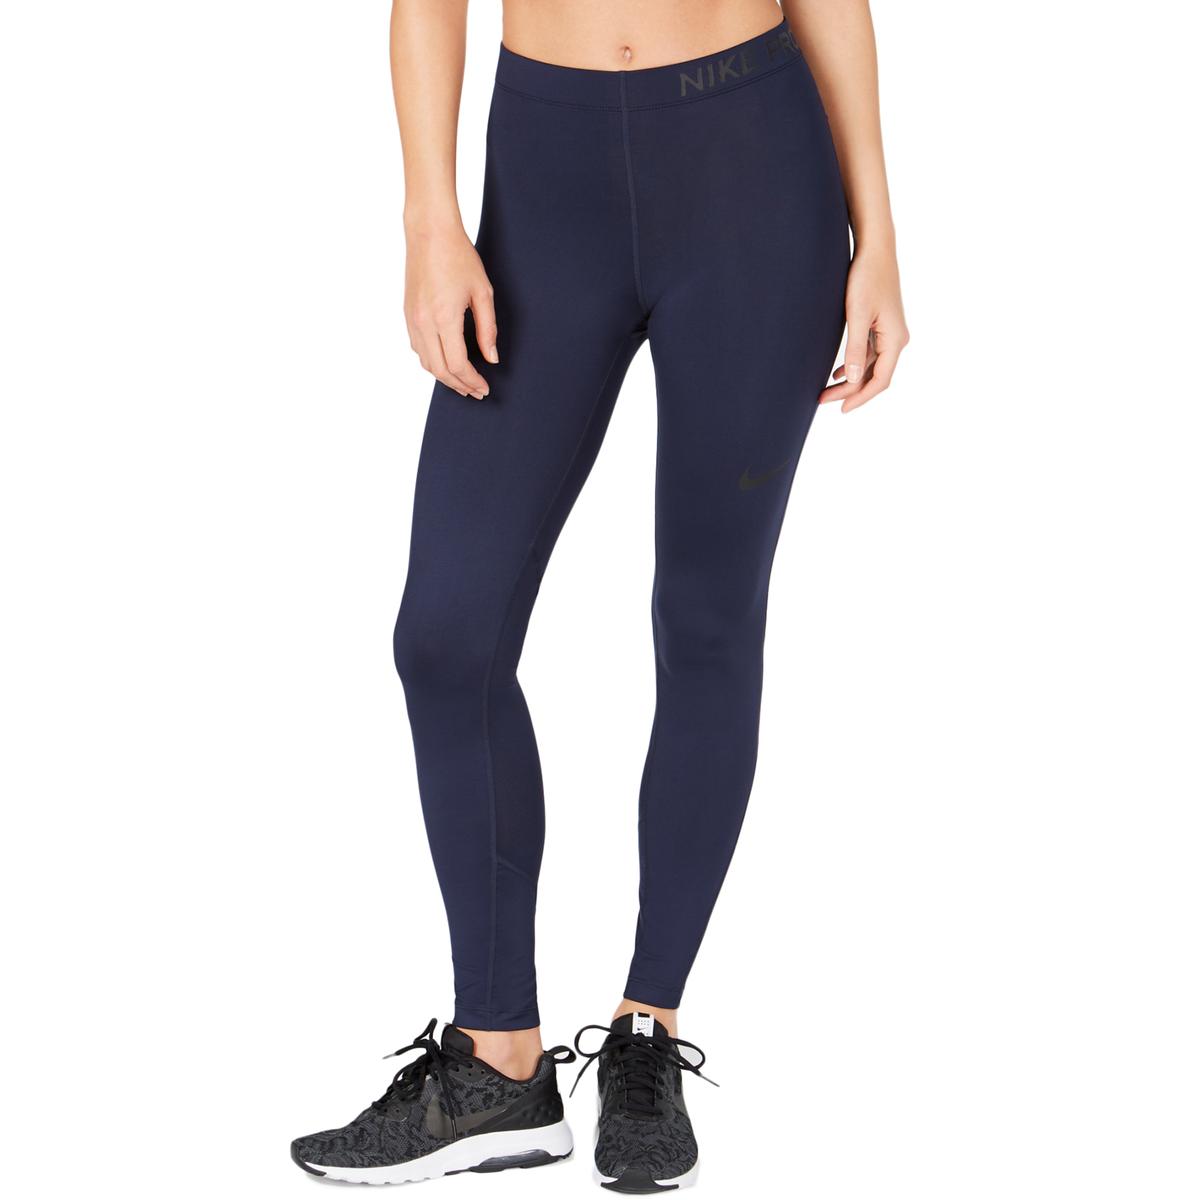 Nike Womens Pro Navy Training Tight Fit Fitness Athletic Leggings S ...